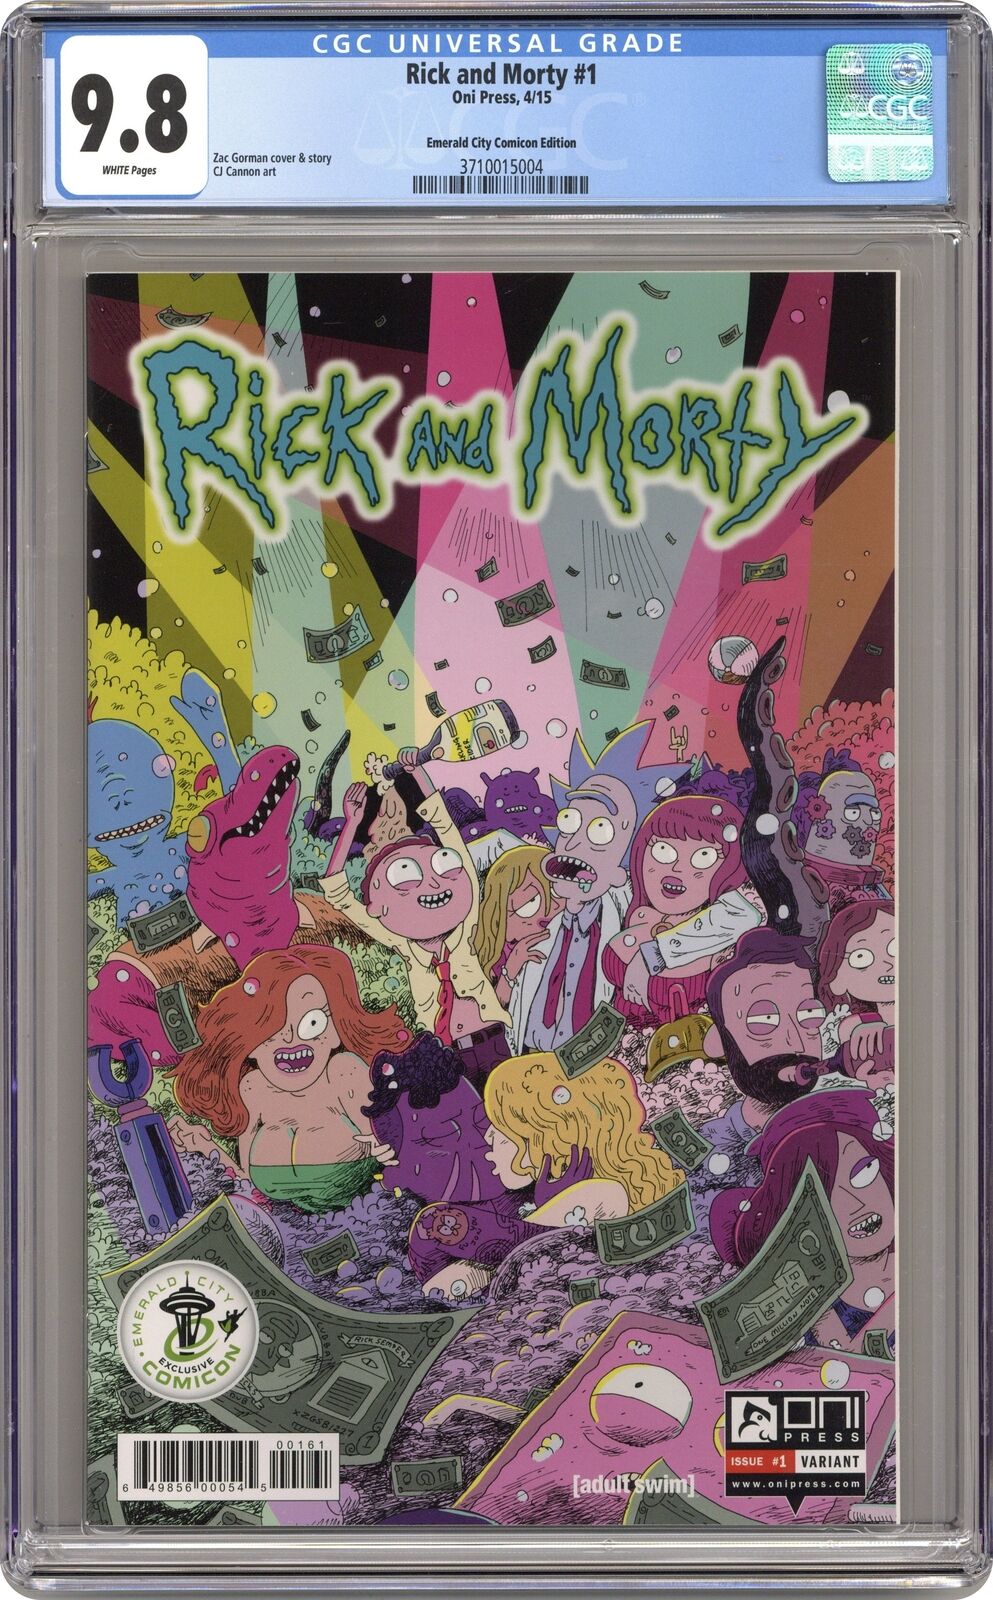 Rick and Morty #1 Emerald City Variant CGC 9.8 2015 3710015004